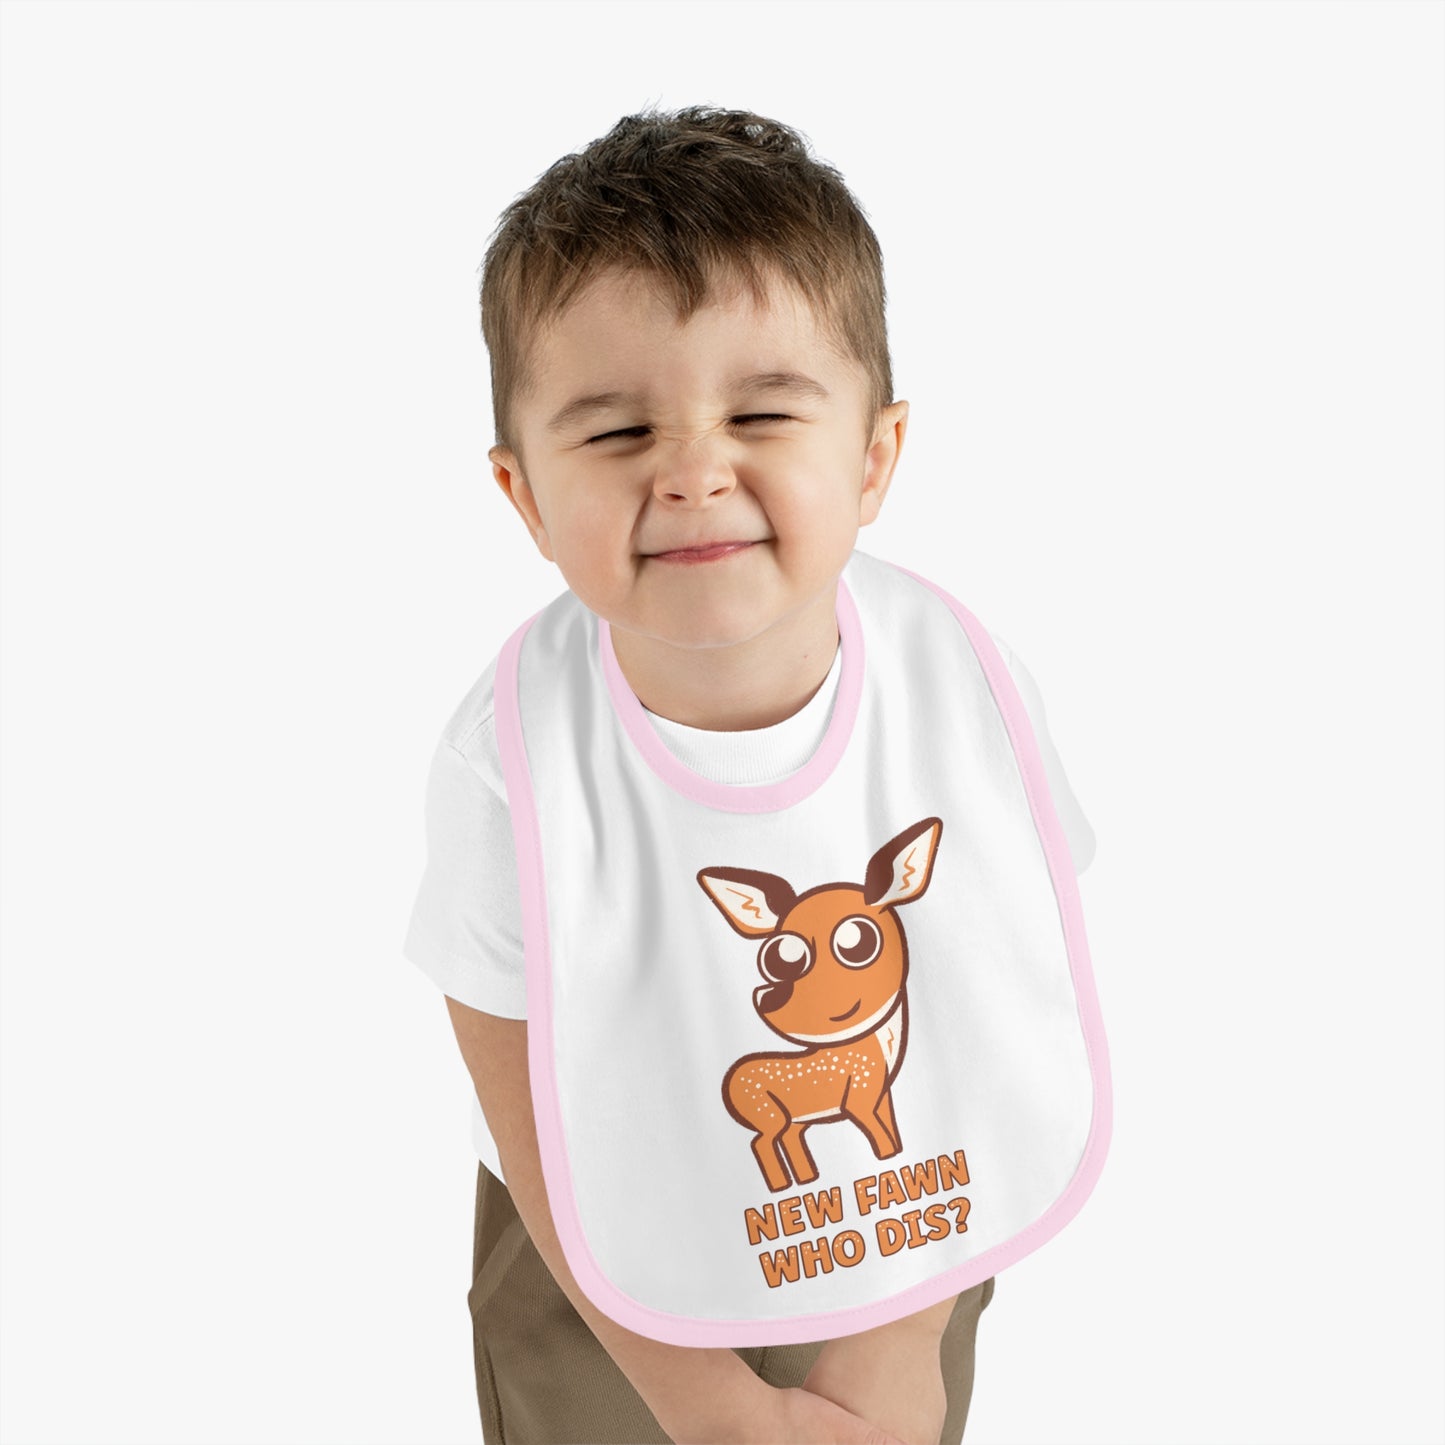 New Fawn Who Dis? - Cute Baby Deer Bib Gift for Newborn or New Parents